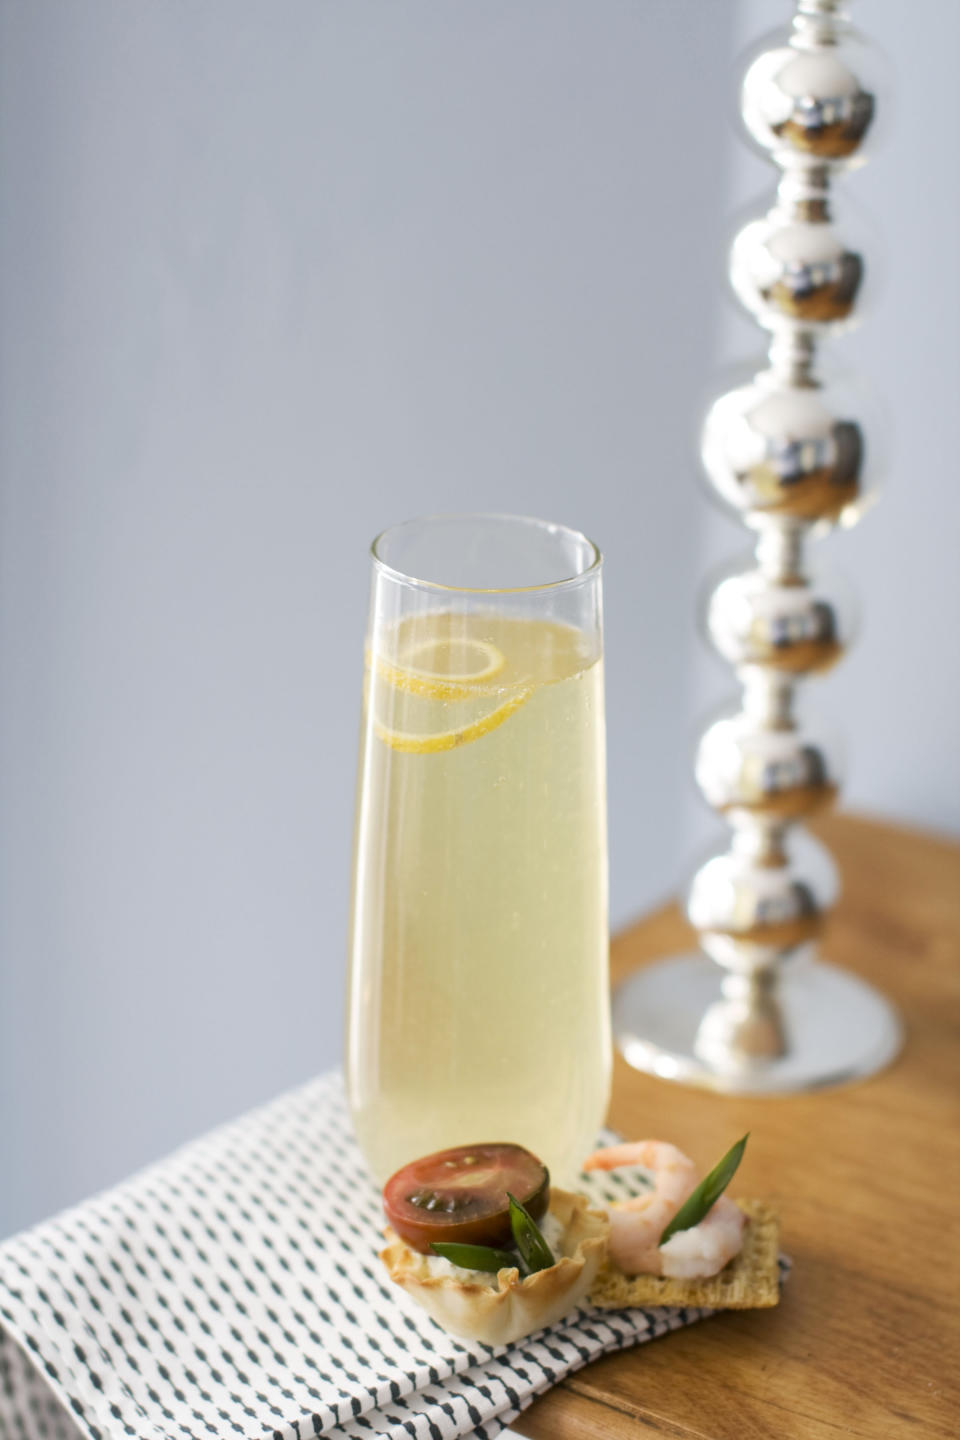 In this image taken on Jan. 28, 2013, a glass of citrus bubbly with a small curl of lemon on top is shown next to canapes on a table in Concord, N.H. (AP Photo/Matthew Mead)